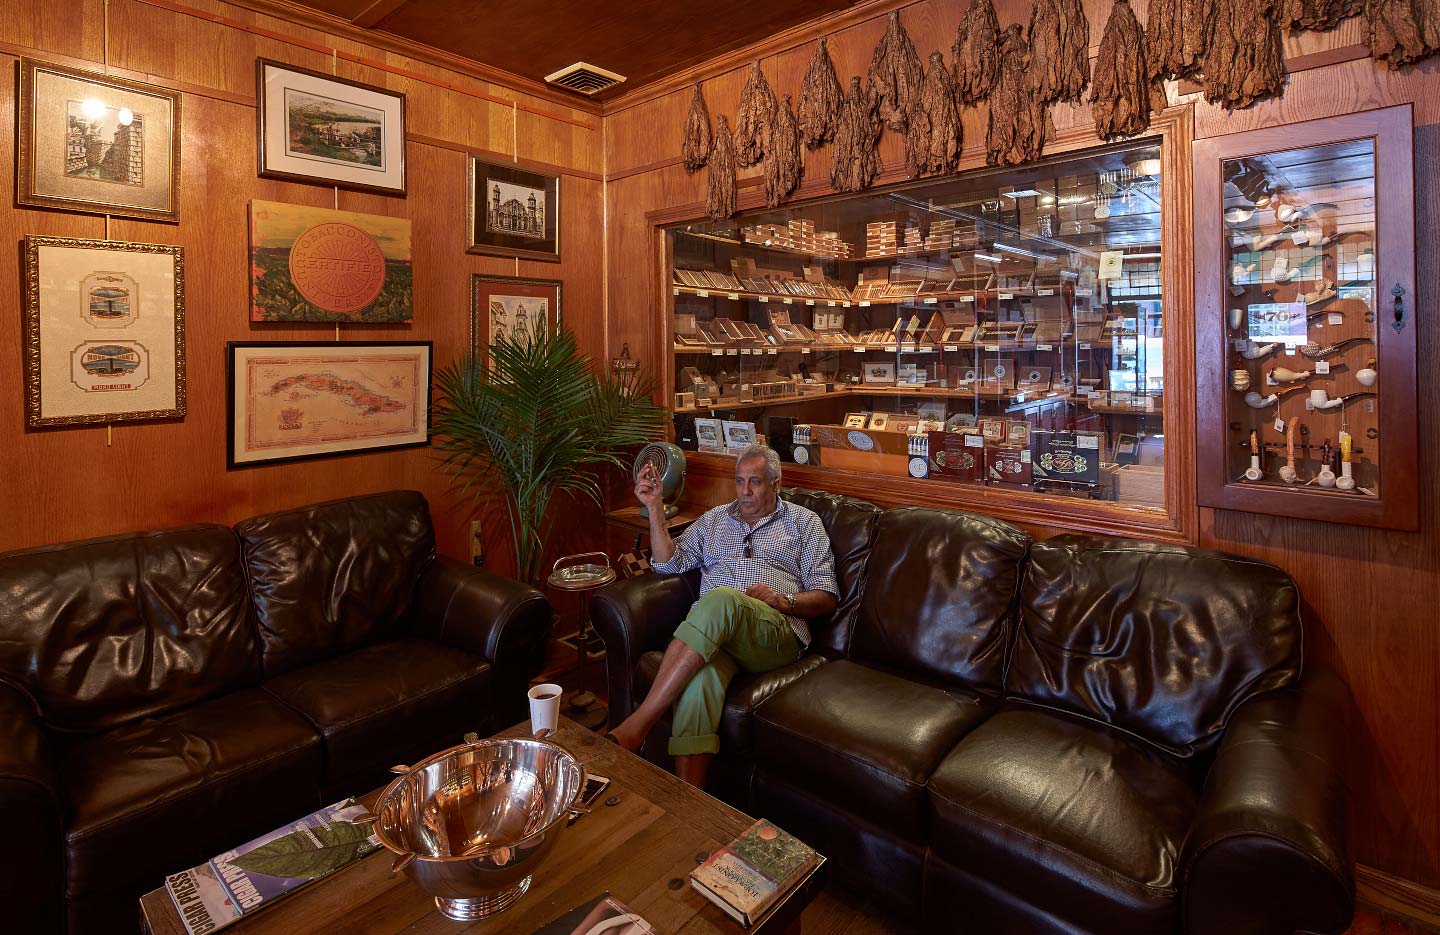 A Little Taste of Cuba, sitting area with view into the humidor. Princeton, NJ, July, 2015.